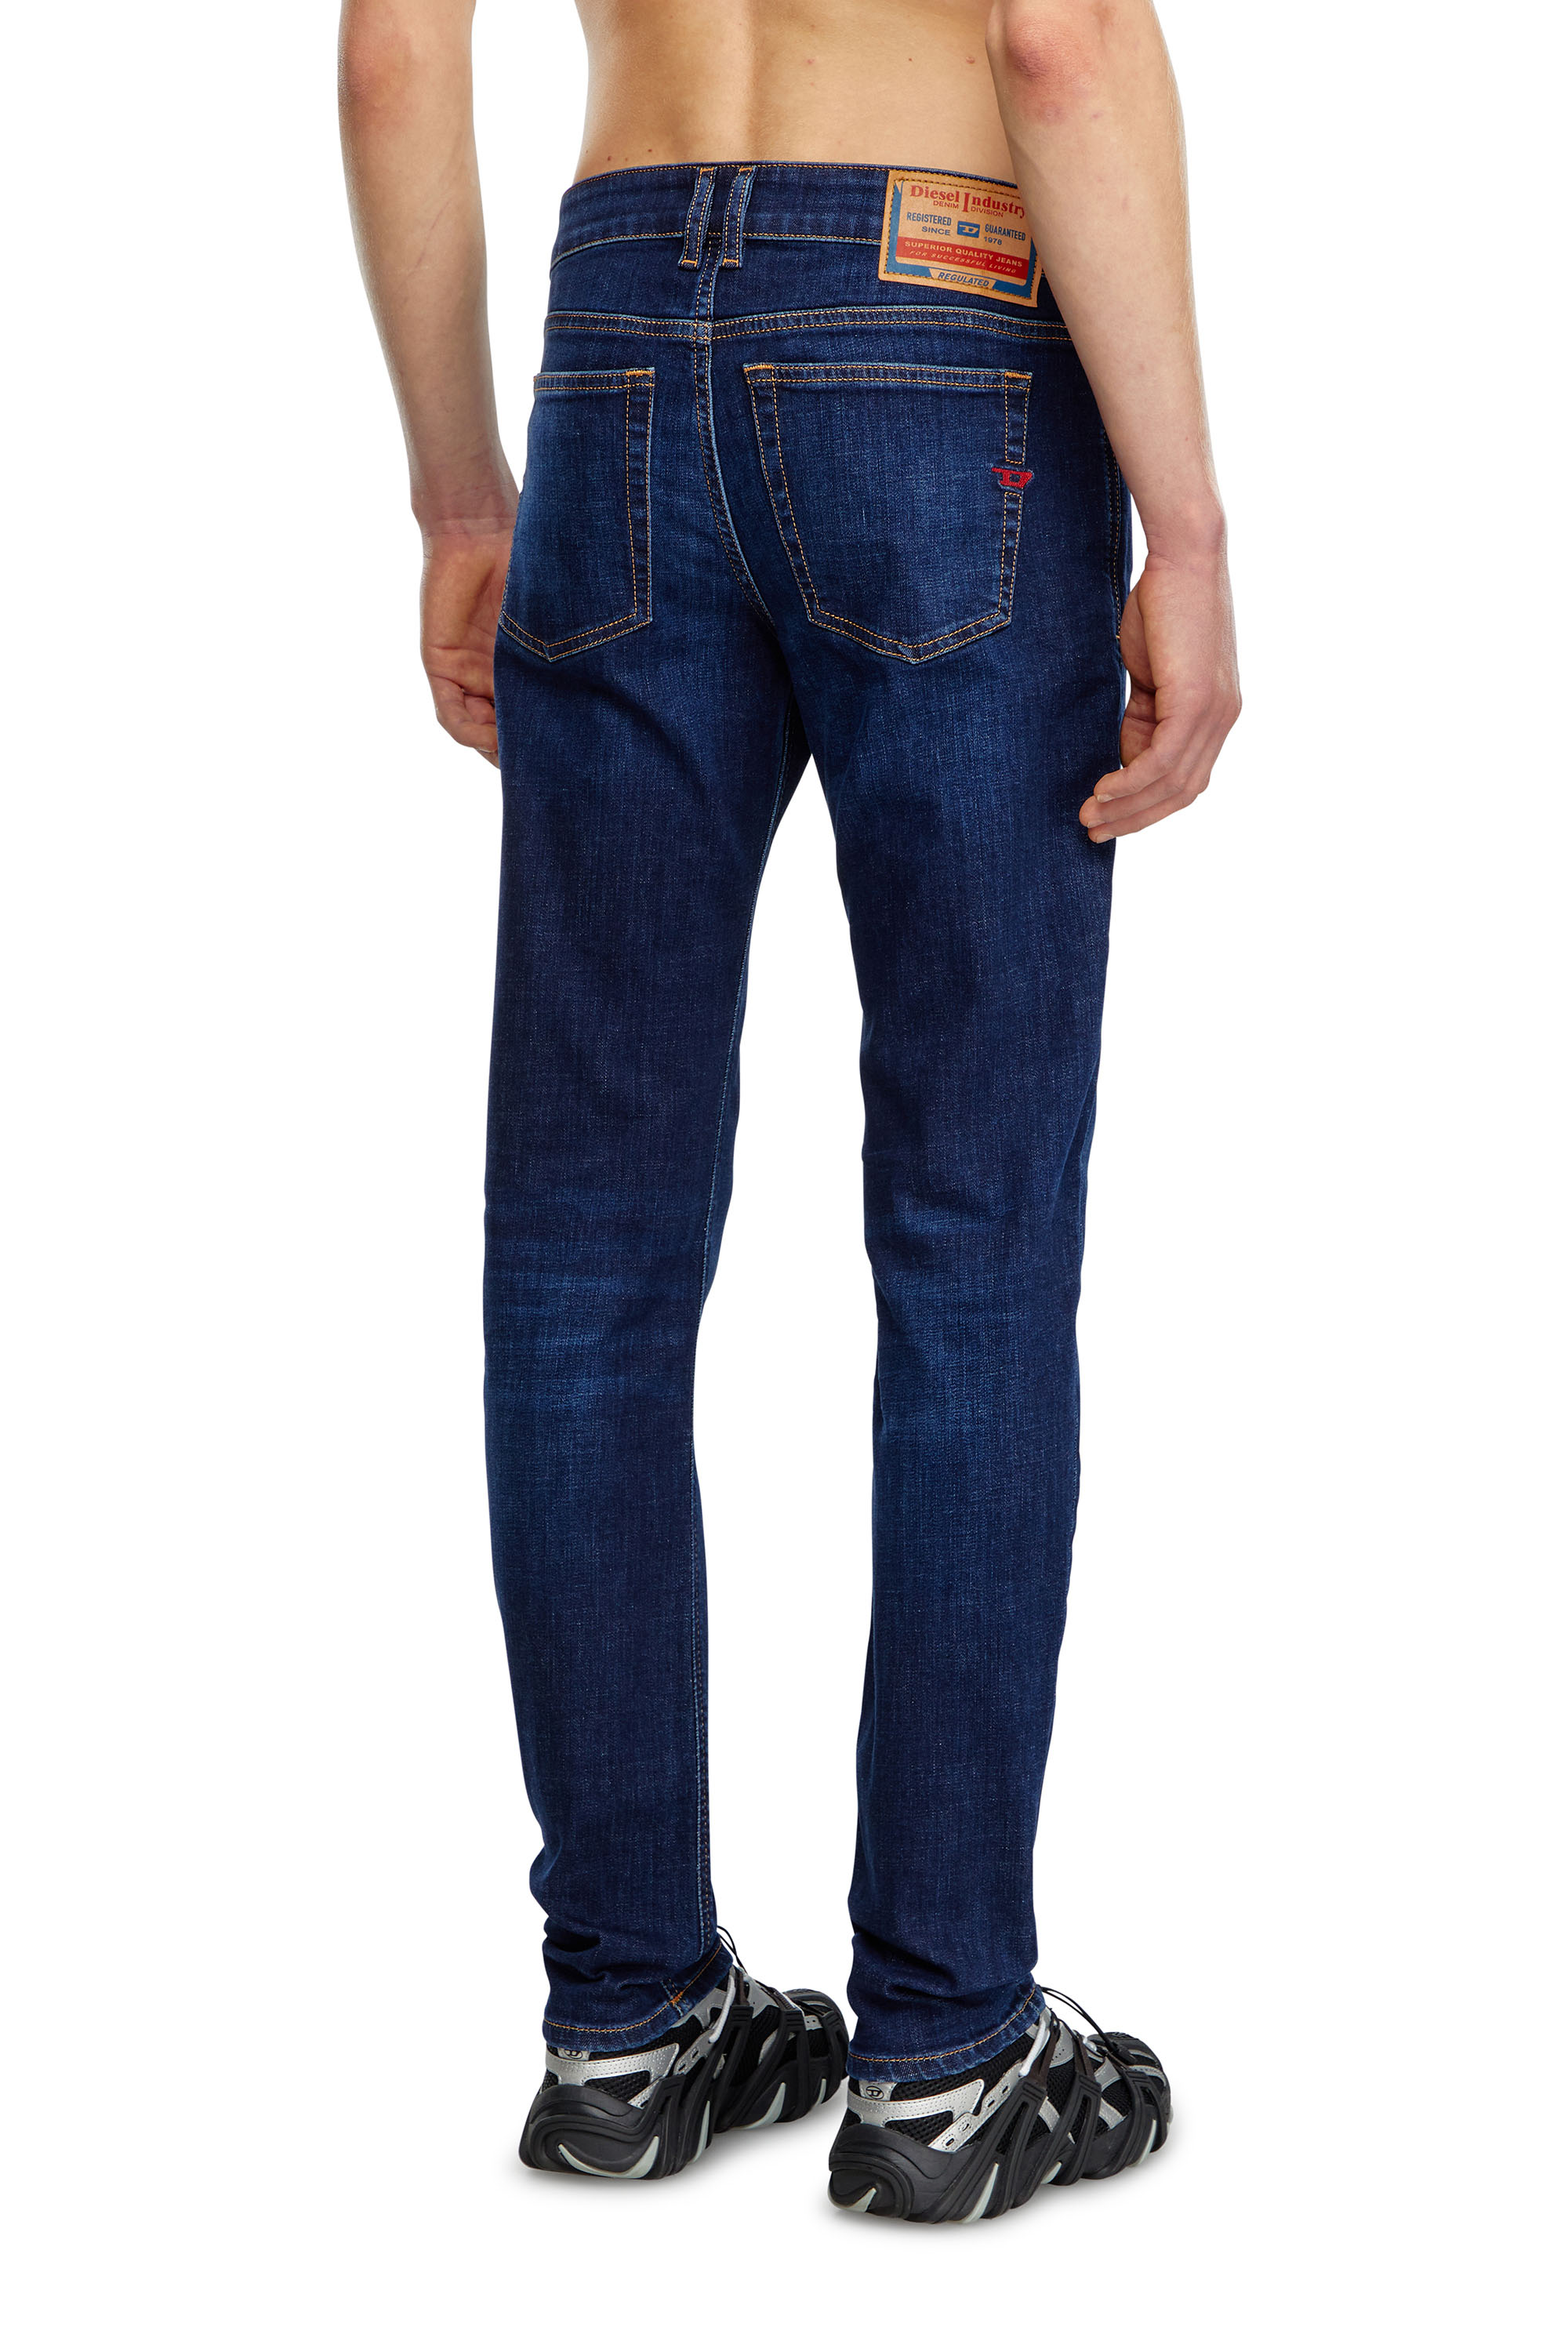 Diesel Online Store: jeans, clothing, shoes, bags and watches